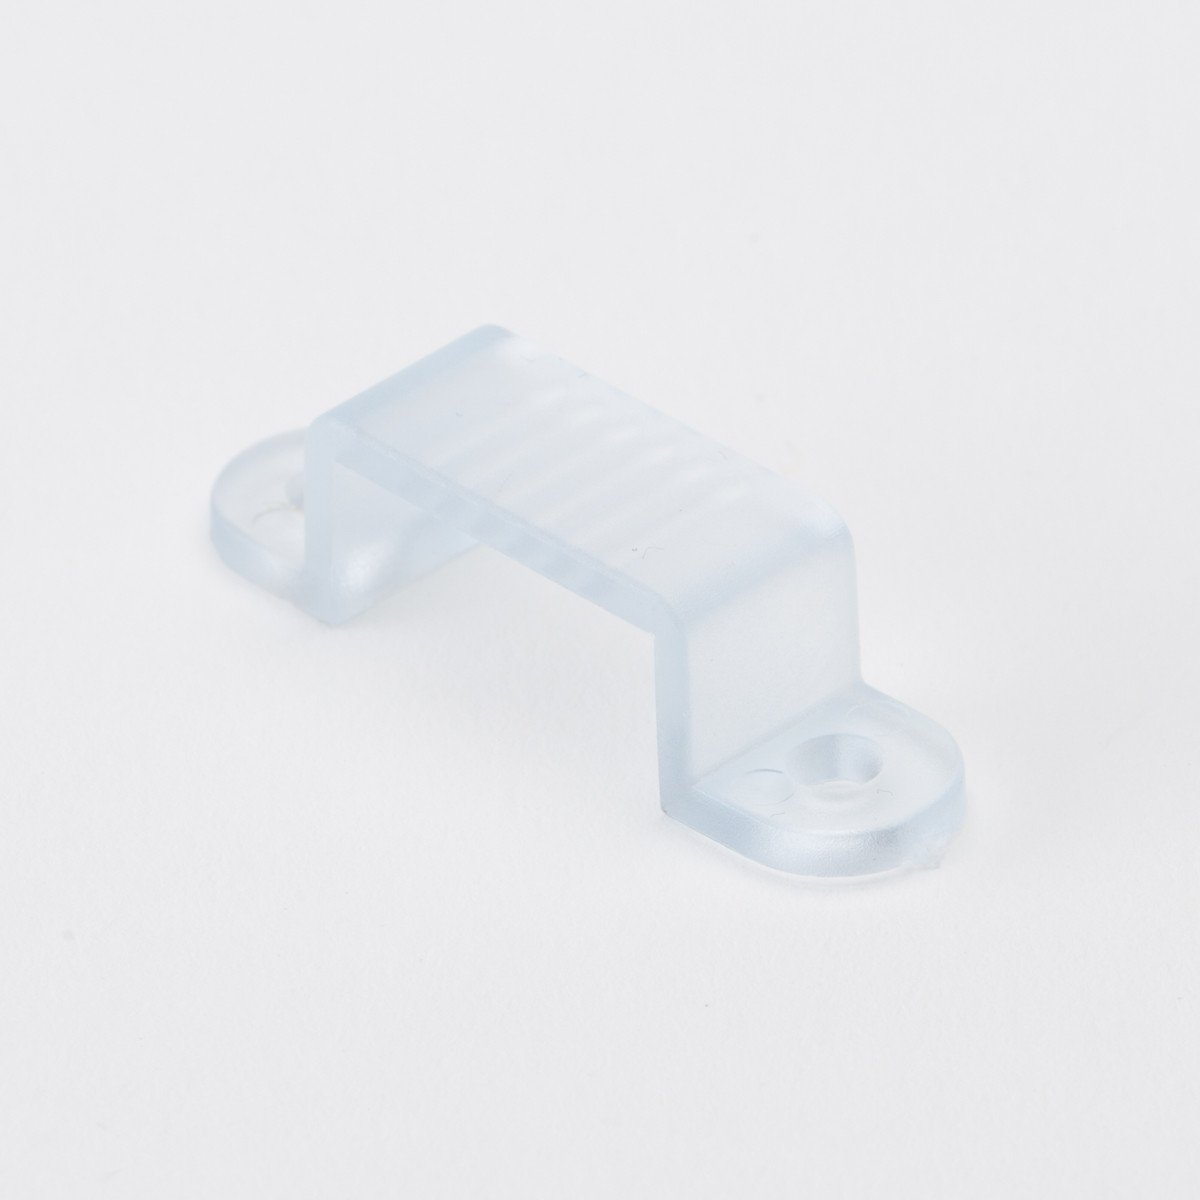 Clear Plastic LED Strip Light Mounting Clips